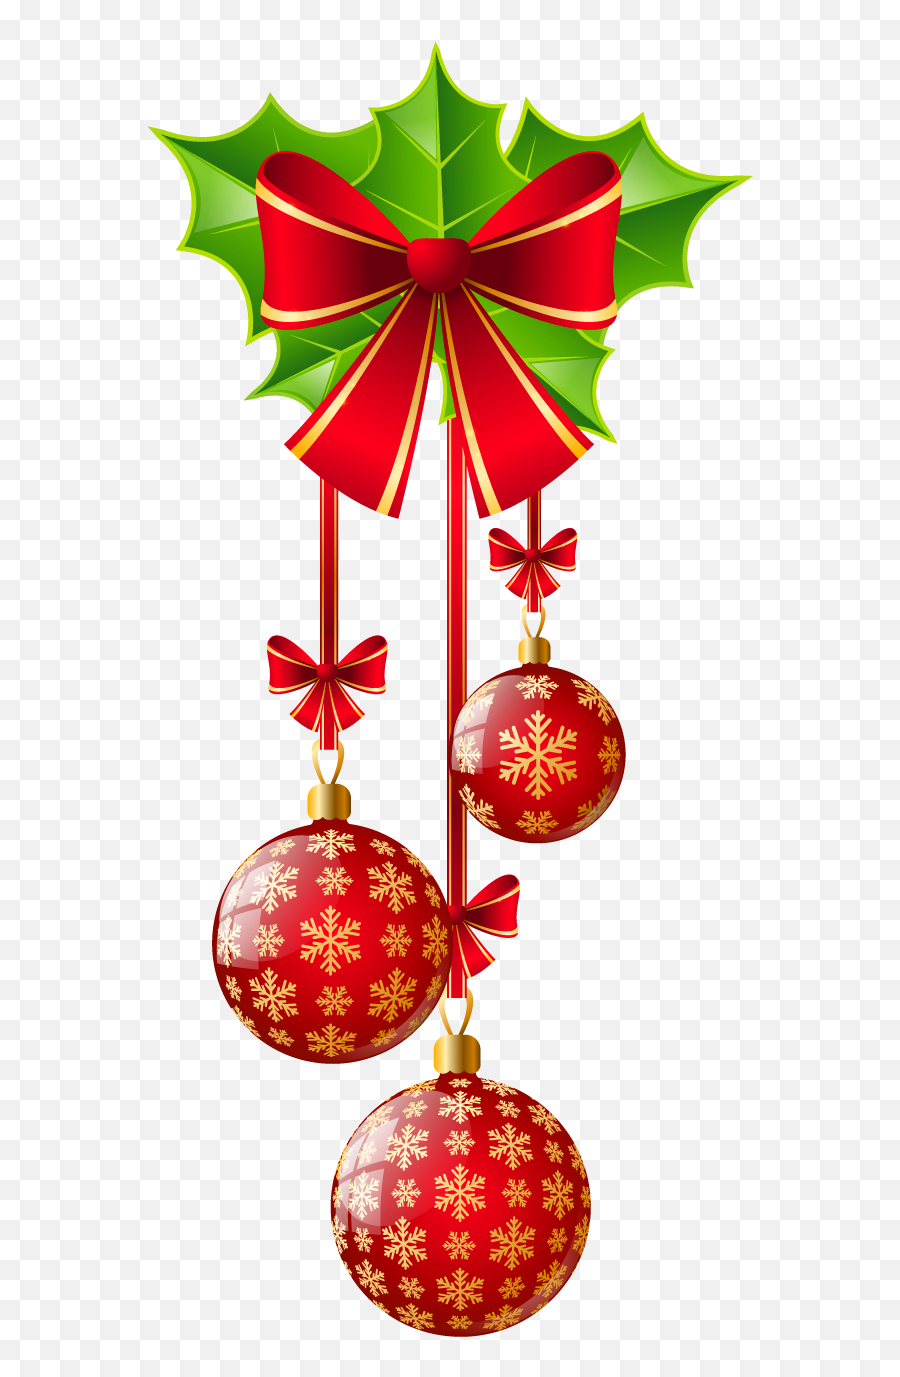 Download Ornaments - Christmas Decorations Clipart Png Merry Christmas Flowers Png Emoji,Christmas Ornaments Clipart